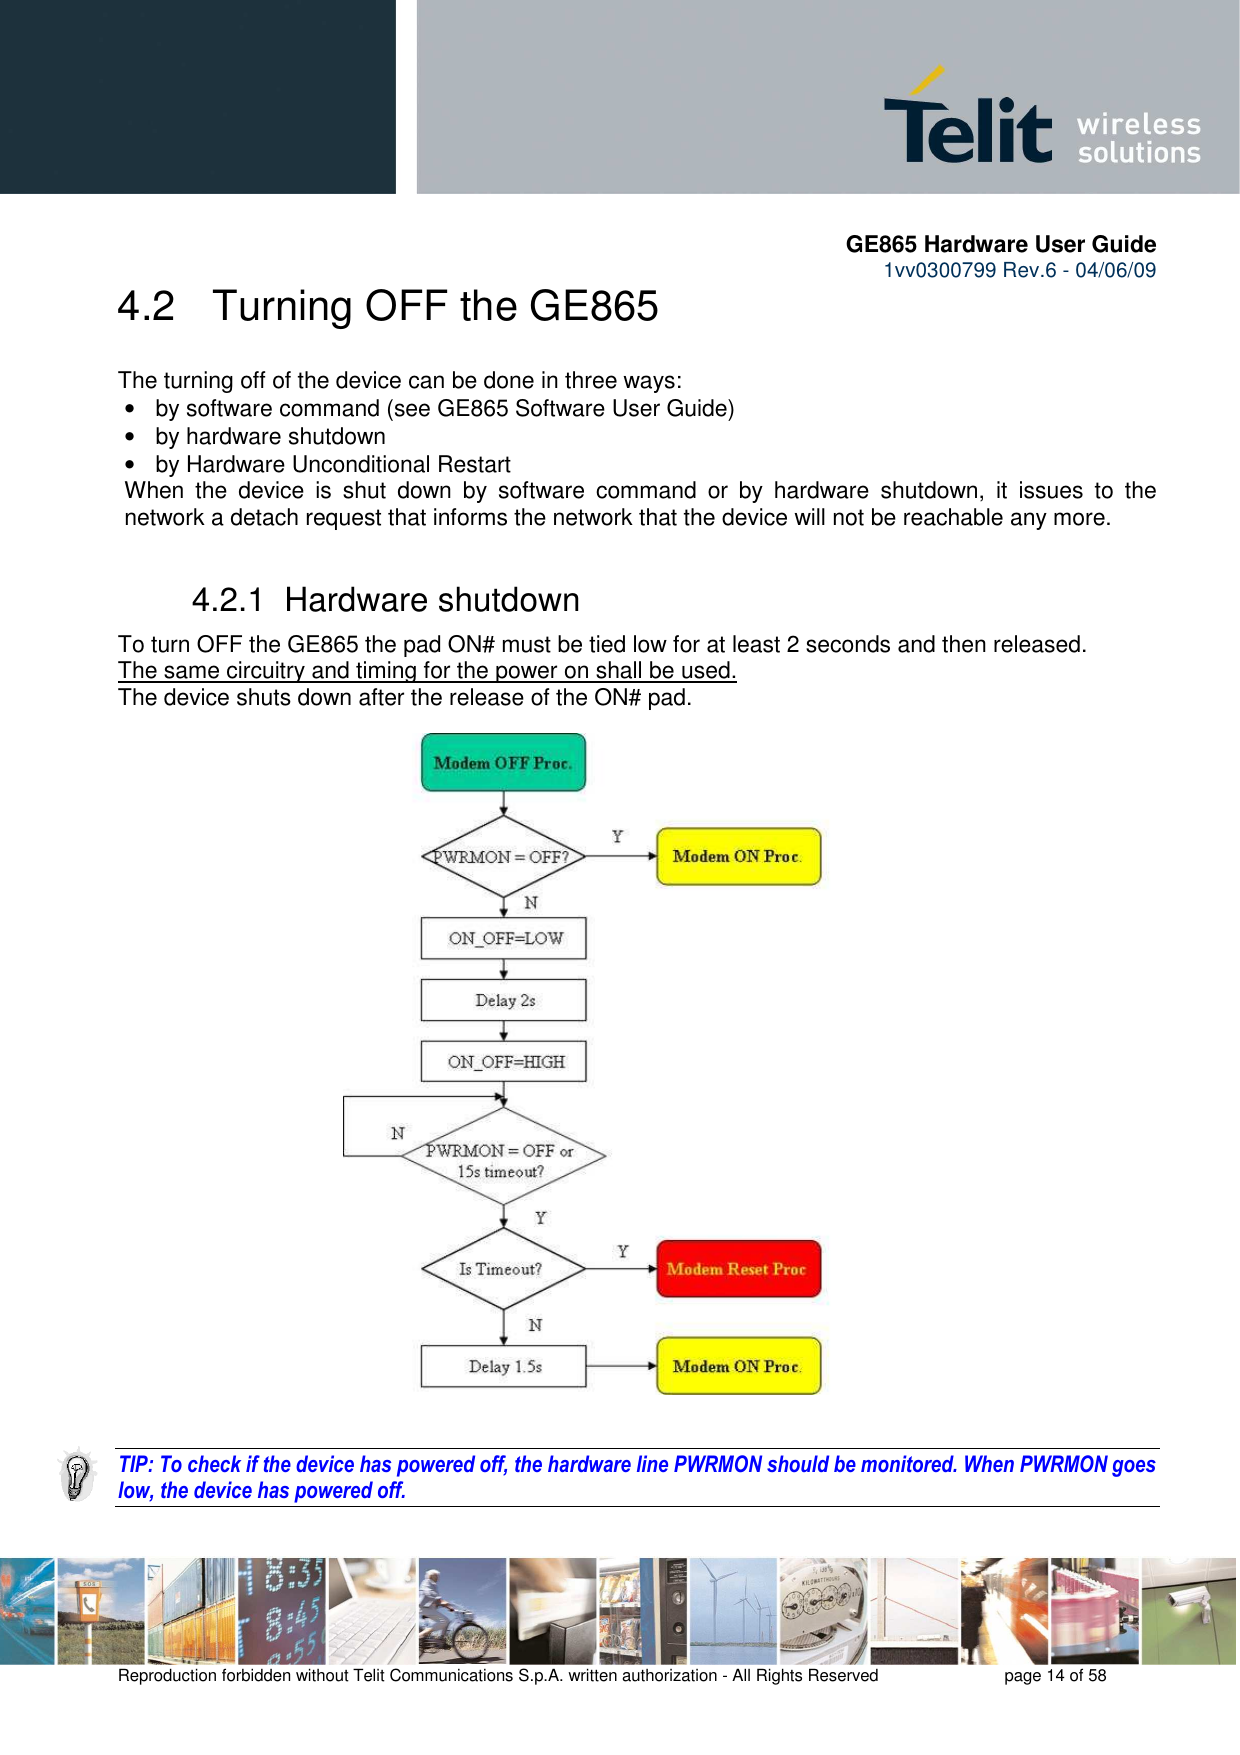       GE865 Hardware User Guide 1vv0300799 Rev.6 - 04/06/09      Reproduction forbidden without Telit Communications S.p.A. written authorization - All Rights Reserved    page 14 of 58  4.2   Turning OFF the GE865 The turning off of the device can be done in three ways: •  by software command (see GE865 Software User Guide) •  by hardware shutdown •  by Hardware Unconditional Restart When  the  device  is  shut  down  by  software  command  or  by  hardware  shutdown,  it  issues  to  the network a detach request that informs the network that the device will not be reachable any more.  4.2.1  Hardware shutdown To turn OFF the GE865 the pad ON# must be tied low for at least 2 seconds and then released. The same circuitry and timing for the power on shall be used. The device shuts down after the release of the ON# pad.                             TIP: To check if the device has powered off, the hardware line PWRMON should be monitored. When PWRMON goes low, the device has powered off.  